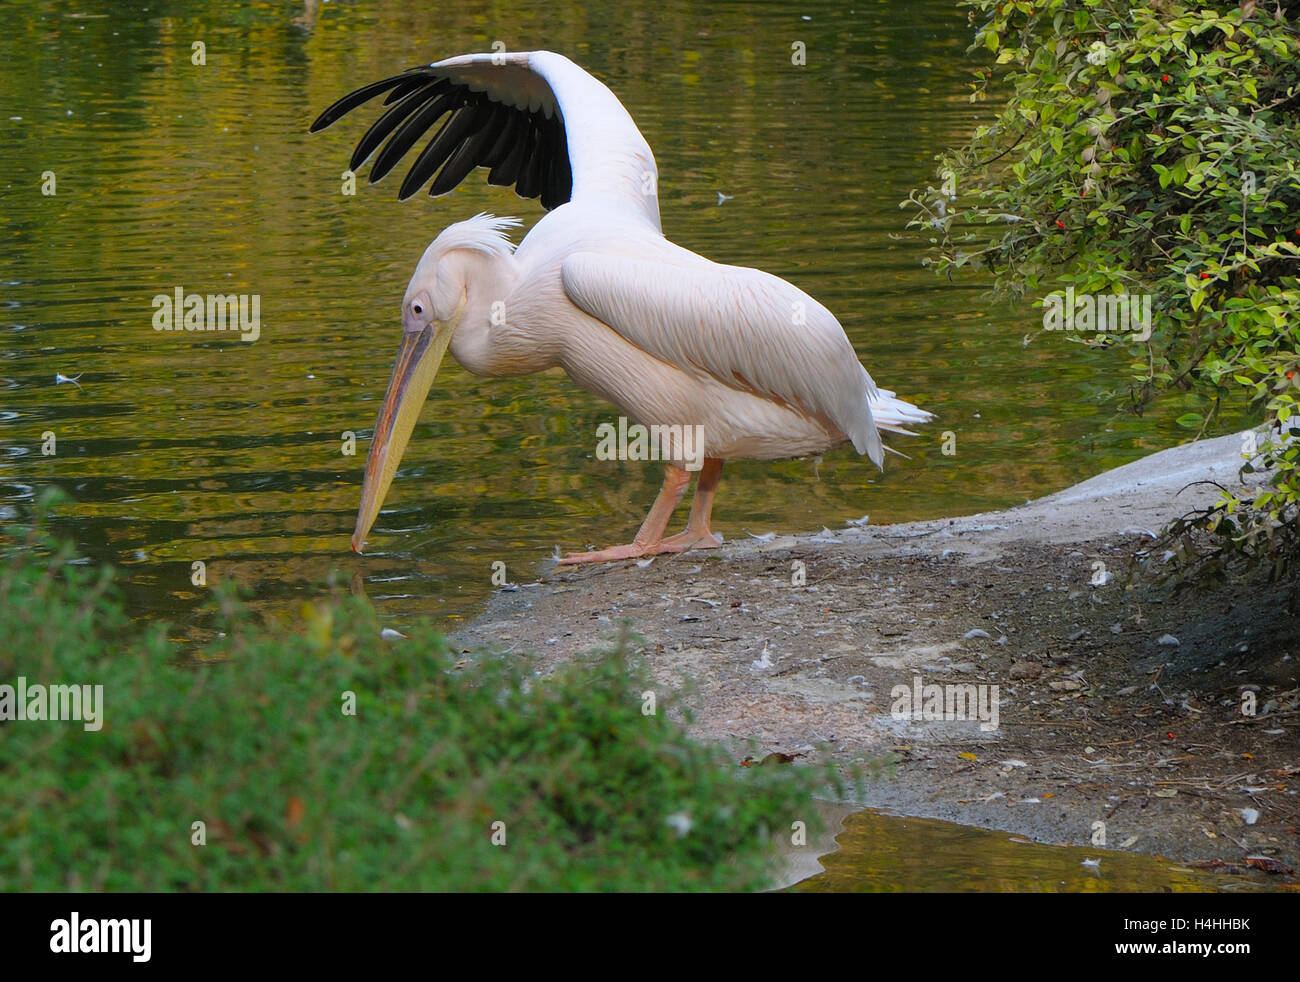 Pelican(Pelecanus onocrotalus) stretching beside a pool of water. Stock Photo